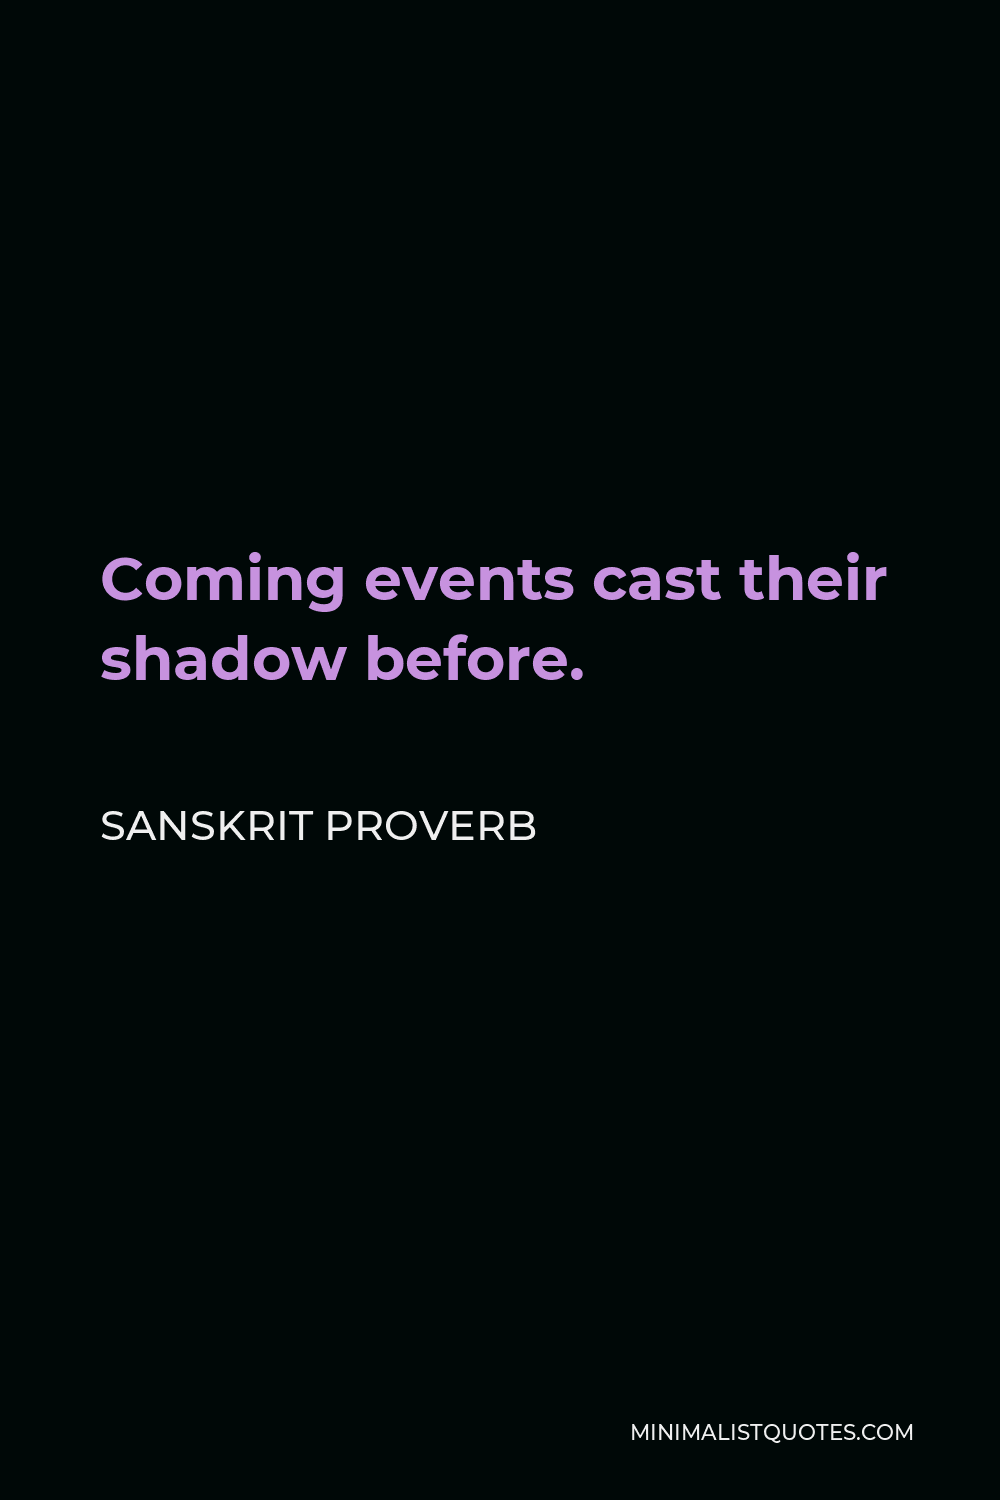 Sanskrit Proverb Quote - Coming events cast their shadow before.